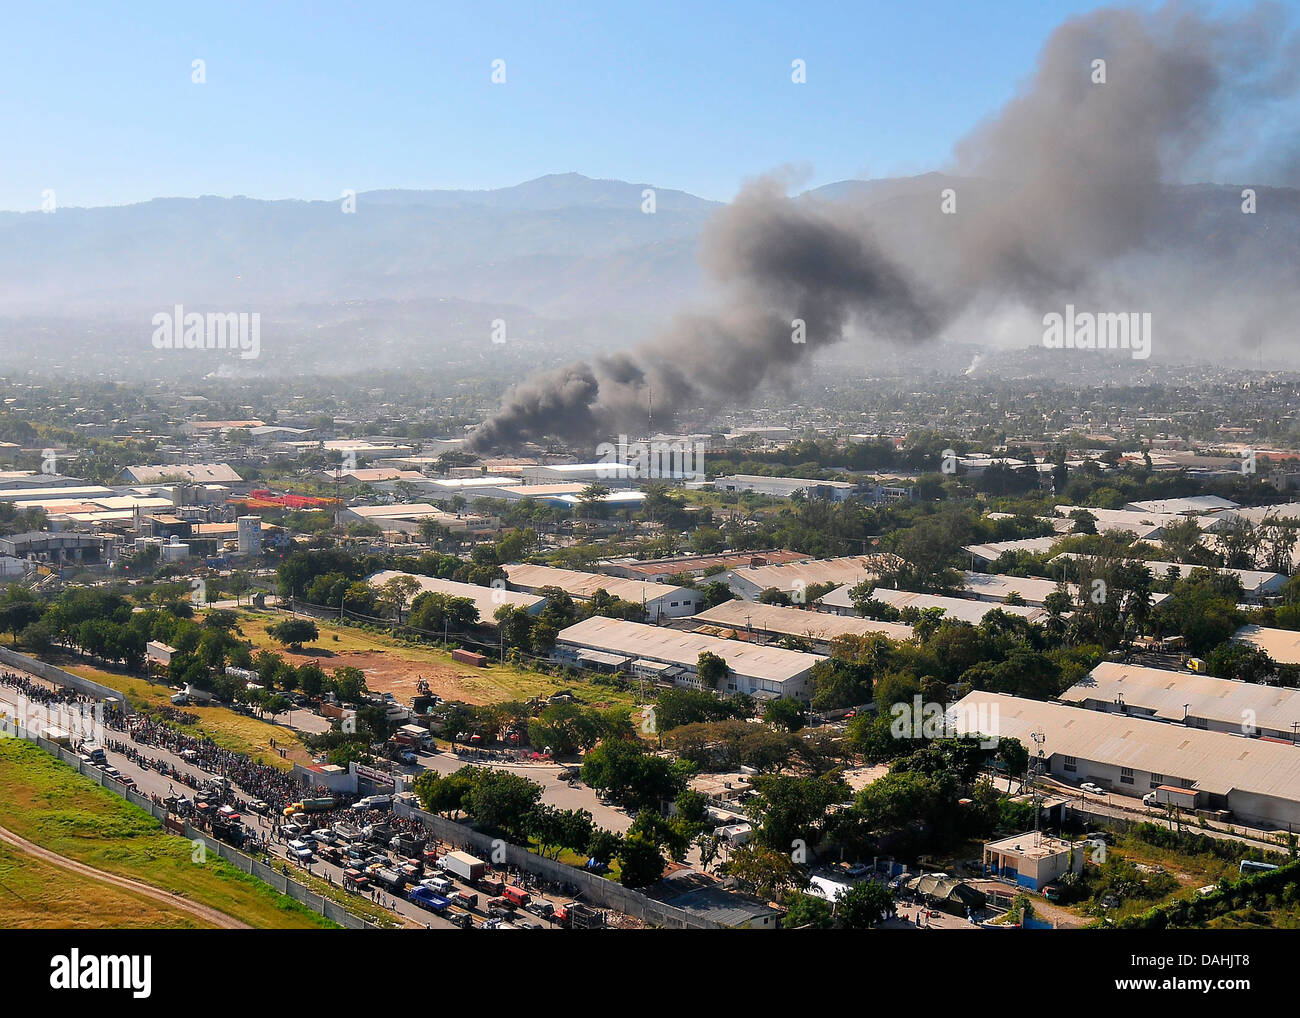 Aerial view of fire in the ruins in the aftermath of a 7.0 magnitude earthquake that killed 220,000 people January 18, 2010 in Port-au-Prince, Haiti. Stock Photo